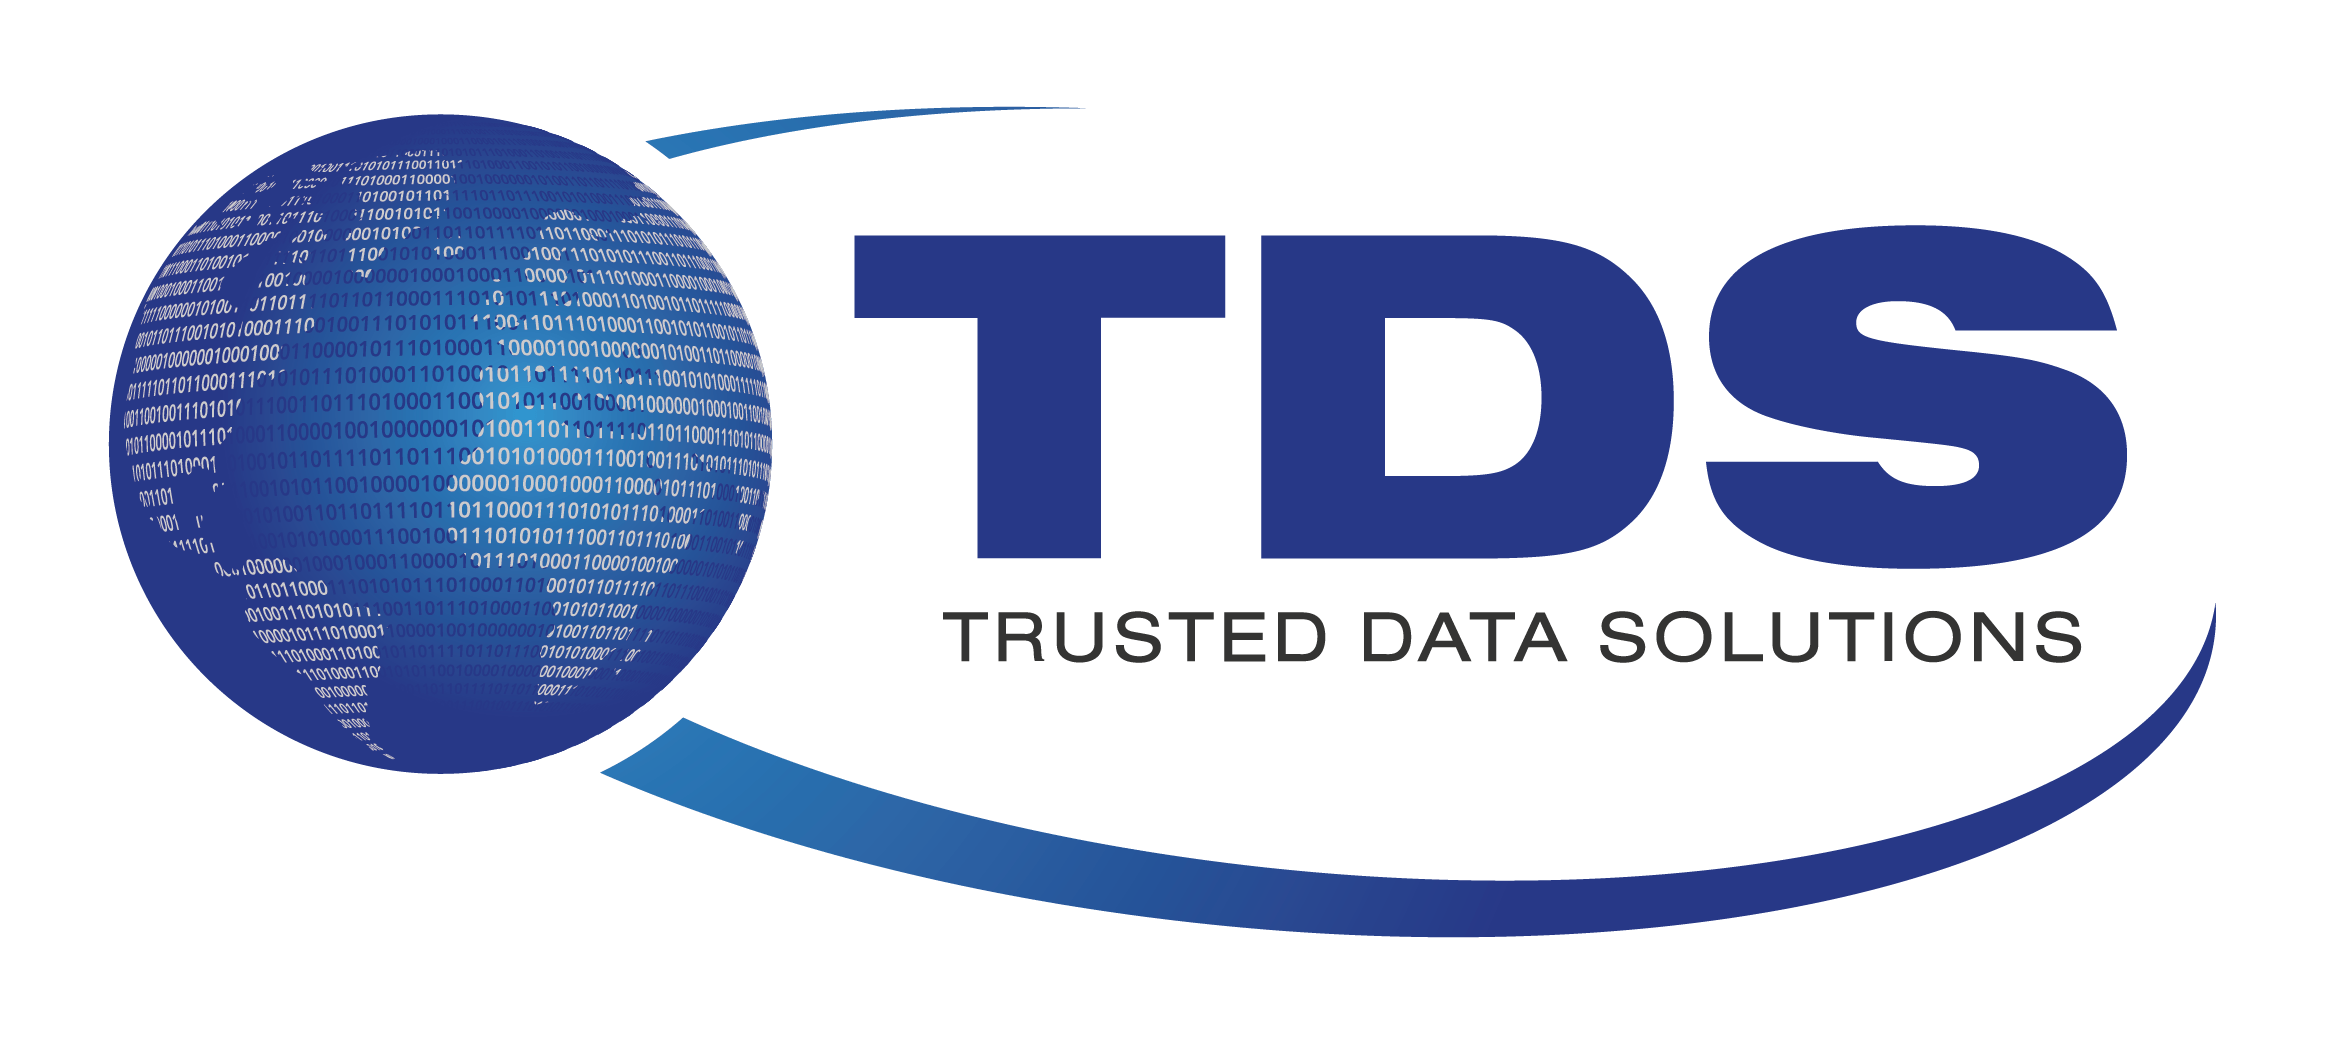 Tds Inc Logo - About Us | Trusted Data Solutions